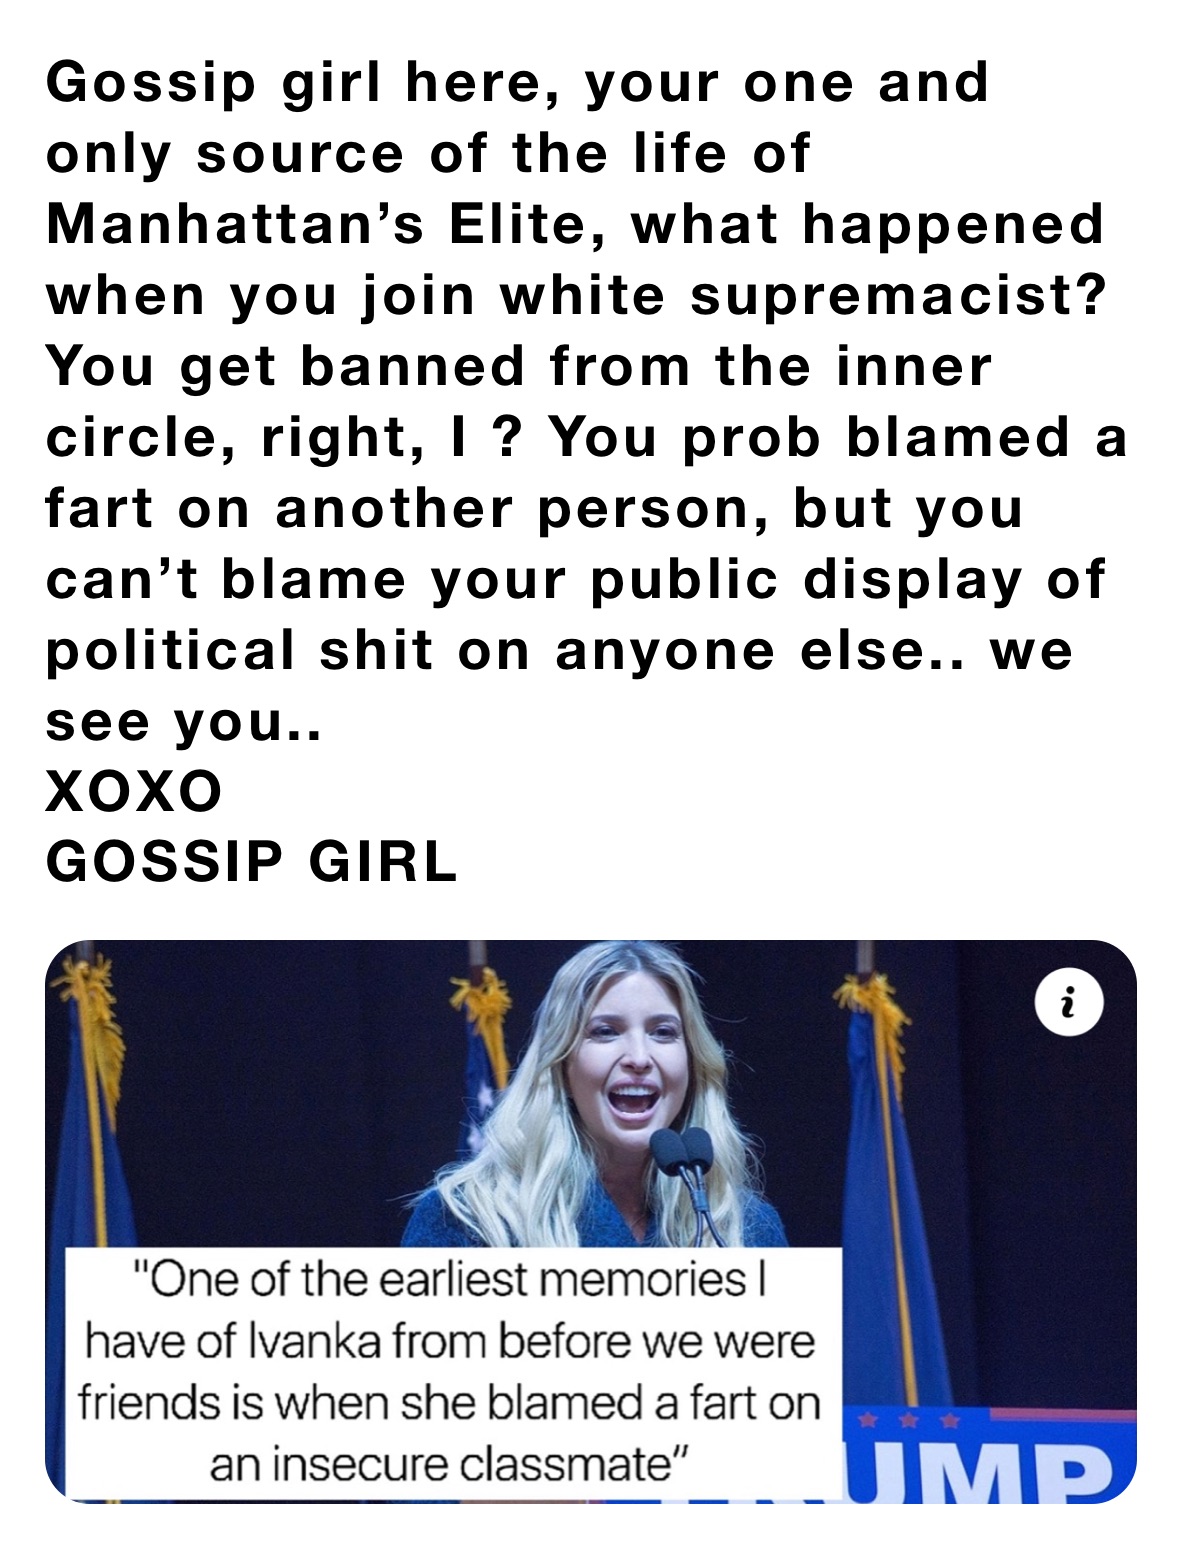 Gossip girl here, your one and only source of the life of Manhattan’s Elite, what happened when you join white supremacist? You get banned from the inner circle, right, I ? You prob blamed a fart on another person, but you can’t blame your public display of political shit on anyone else.. we see you..
XOXO
GOSSIP GIRL